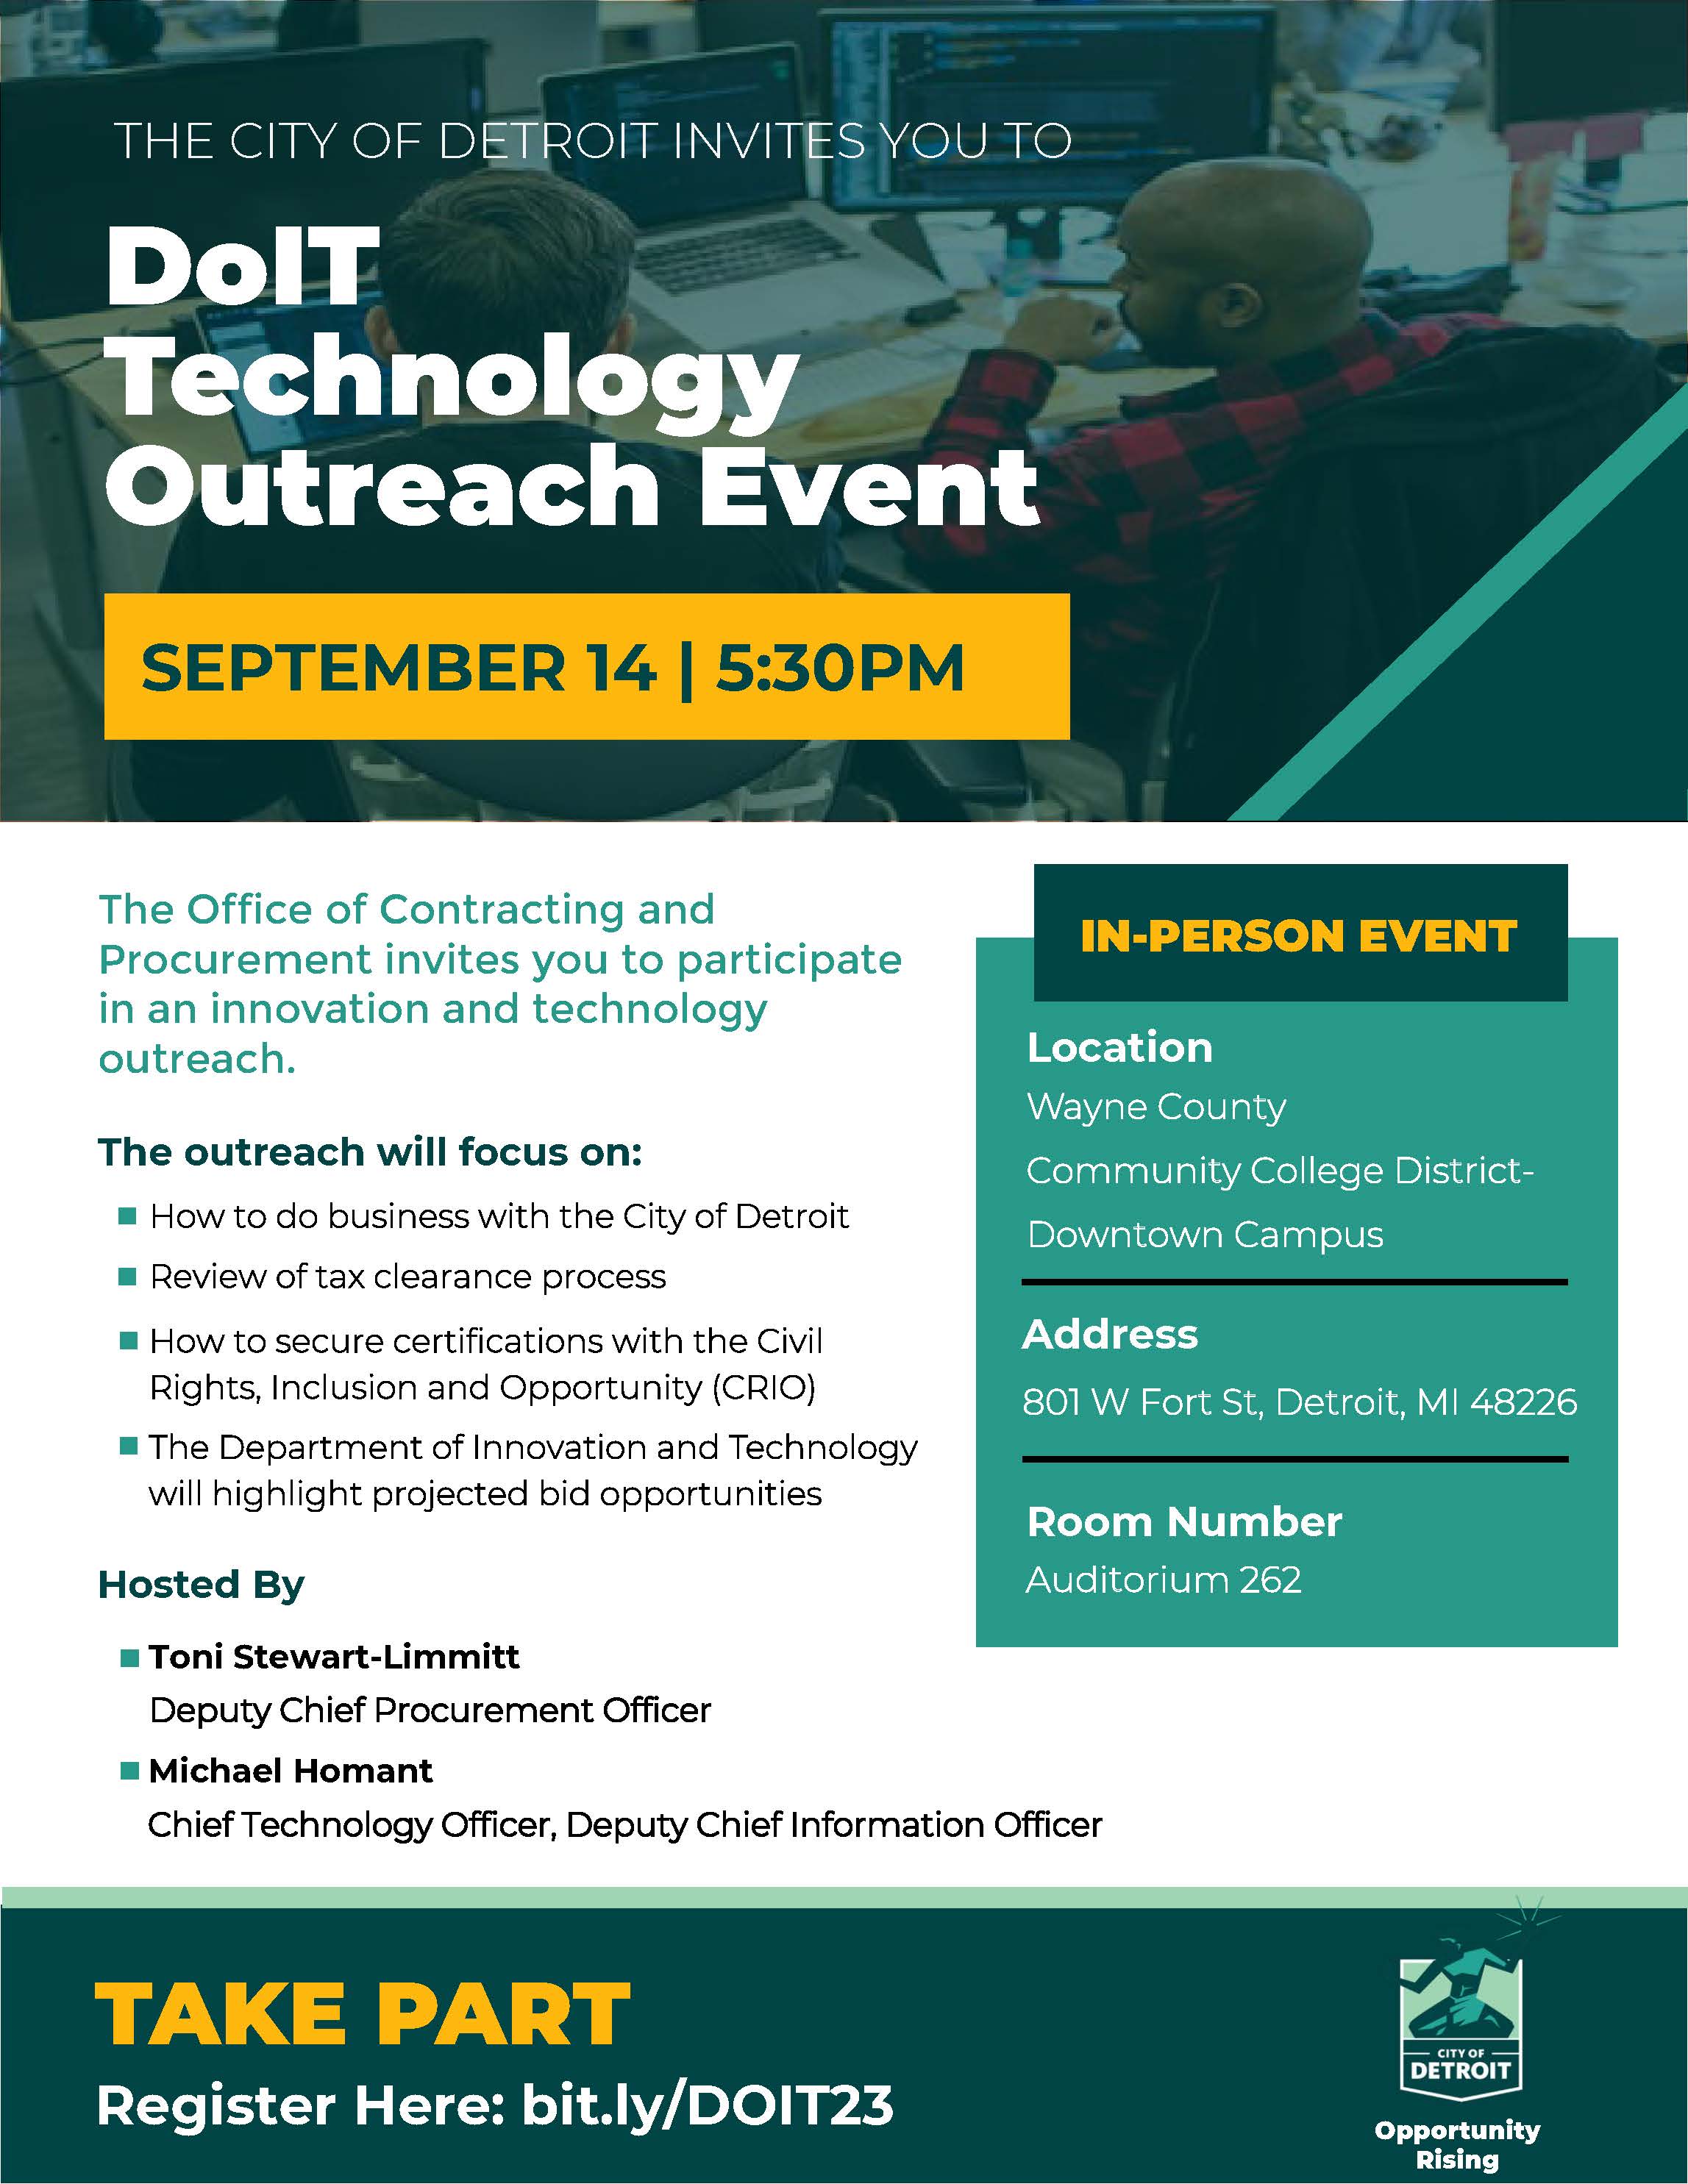 Take Part in 2023 Annual DoIT Outreach Event